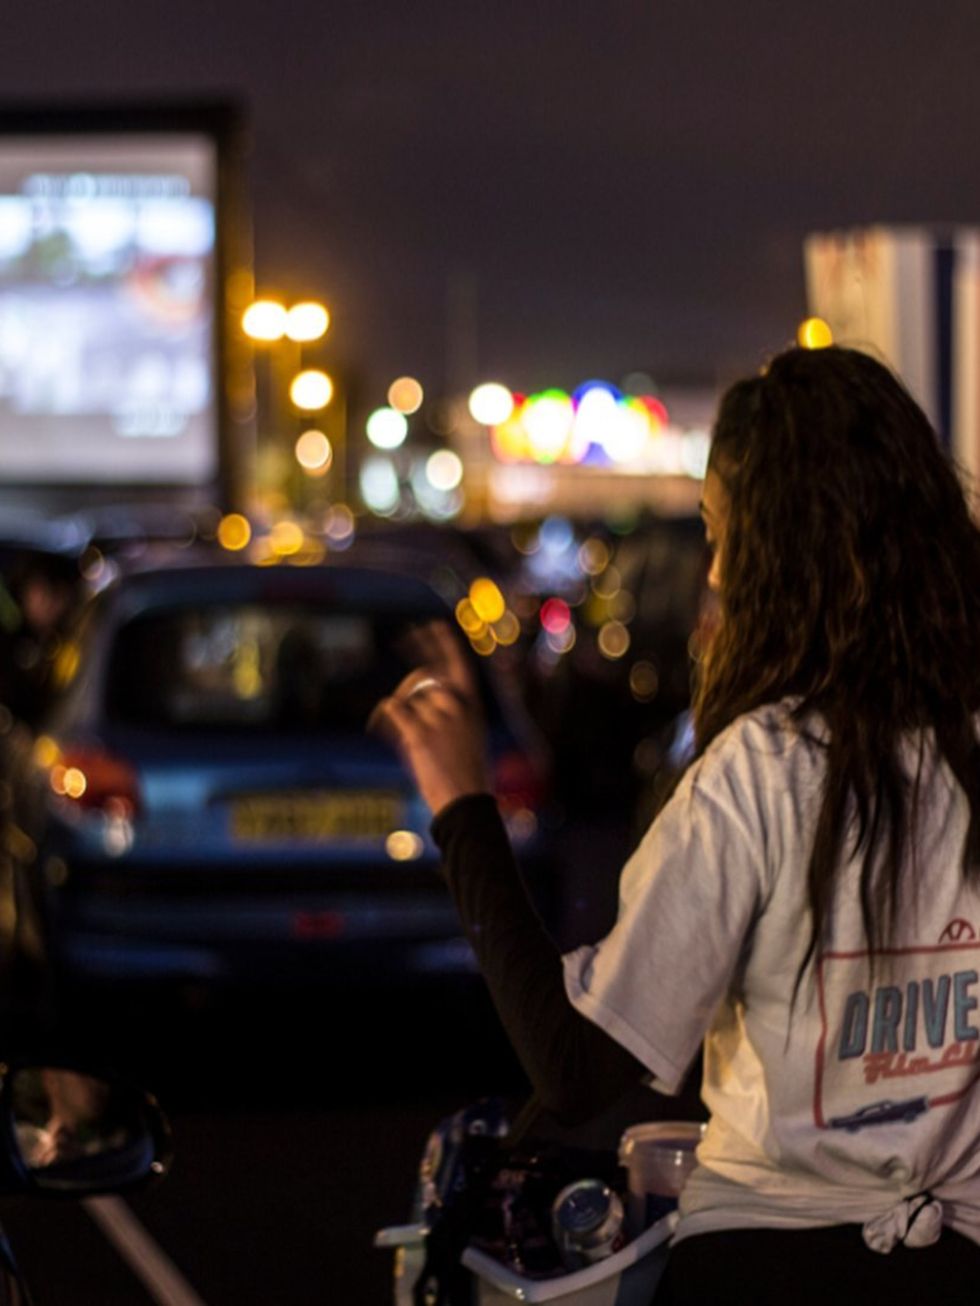 &lt;p&gt;&lt;strong&gt;DRIVE-IN CINEMA:&lt;/strong&gt;&lt;/p&gt;&lt;p&gt;Ever wanted to experience a drive-in cinema just like the ones in the movies? Now&rsquo;s your chance! This weekend the Drive In Film Club, London&#039;s only Drive In cinema, is set